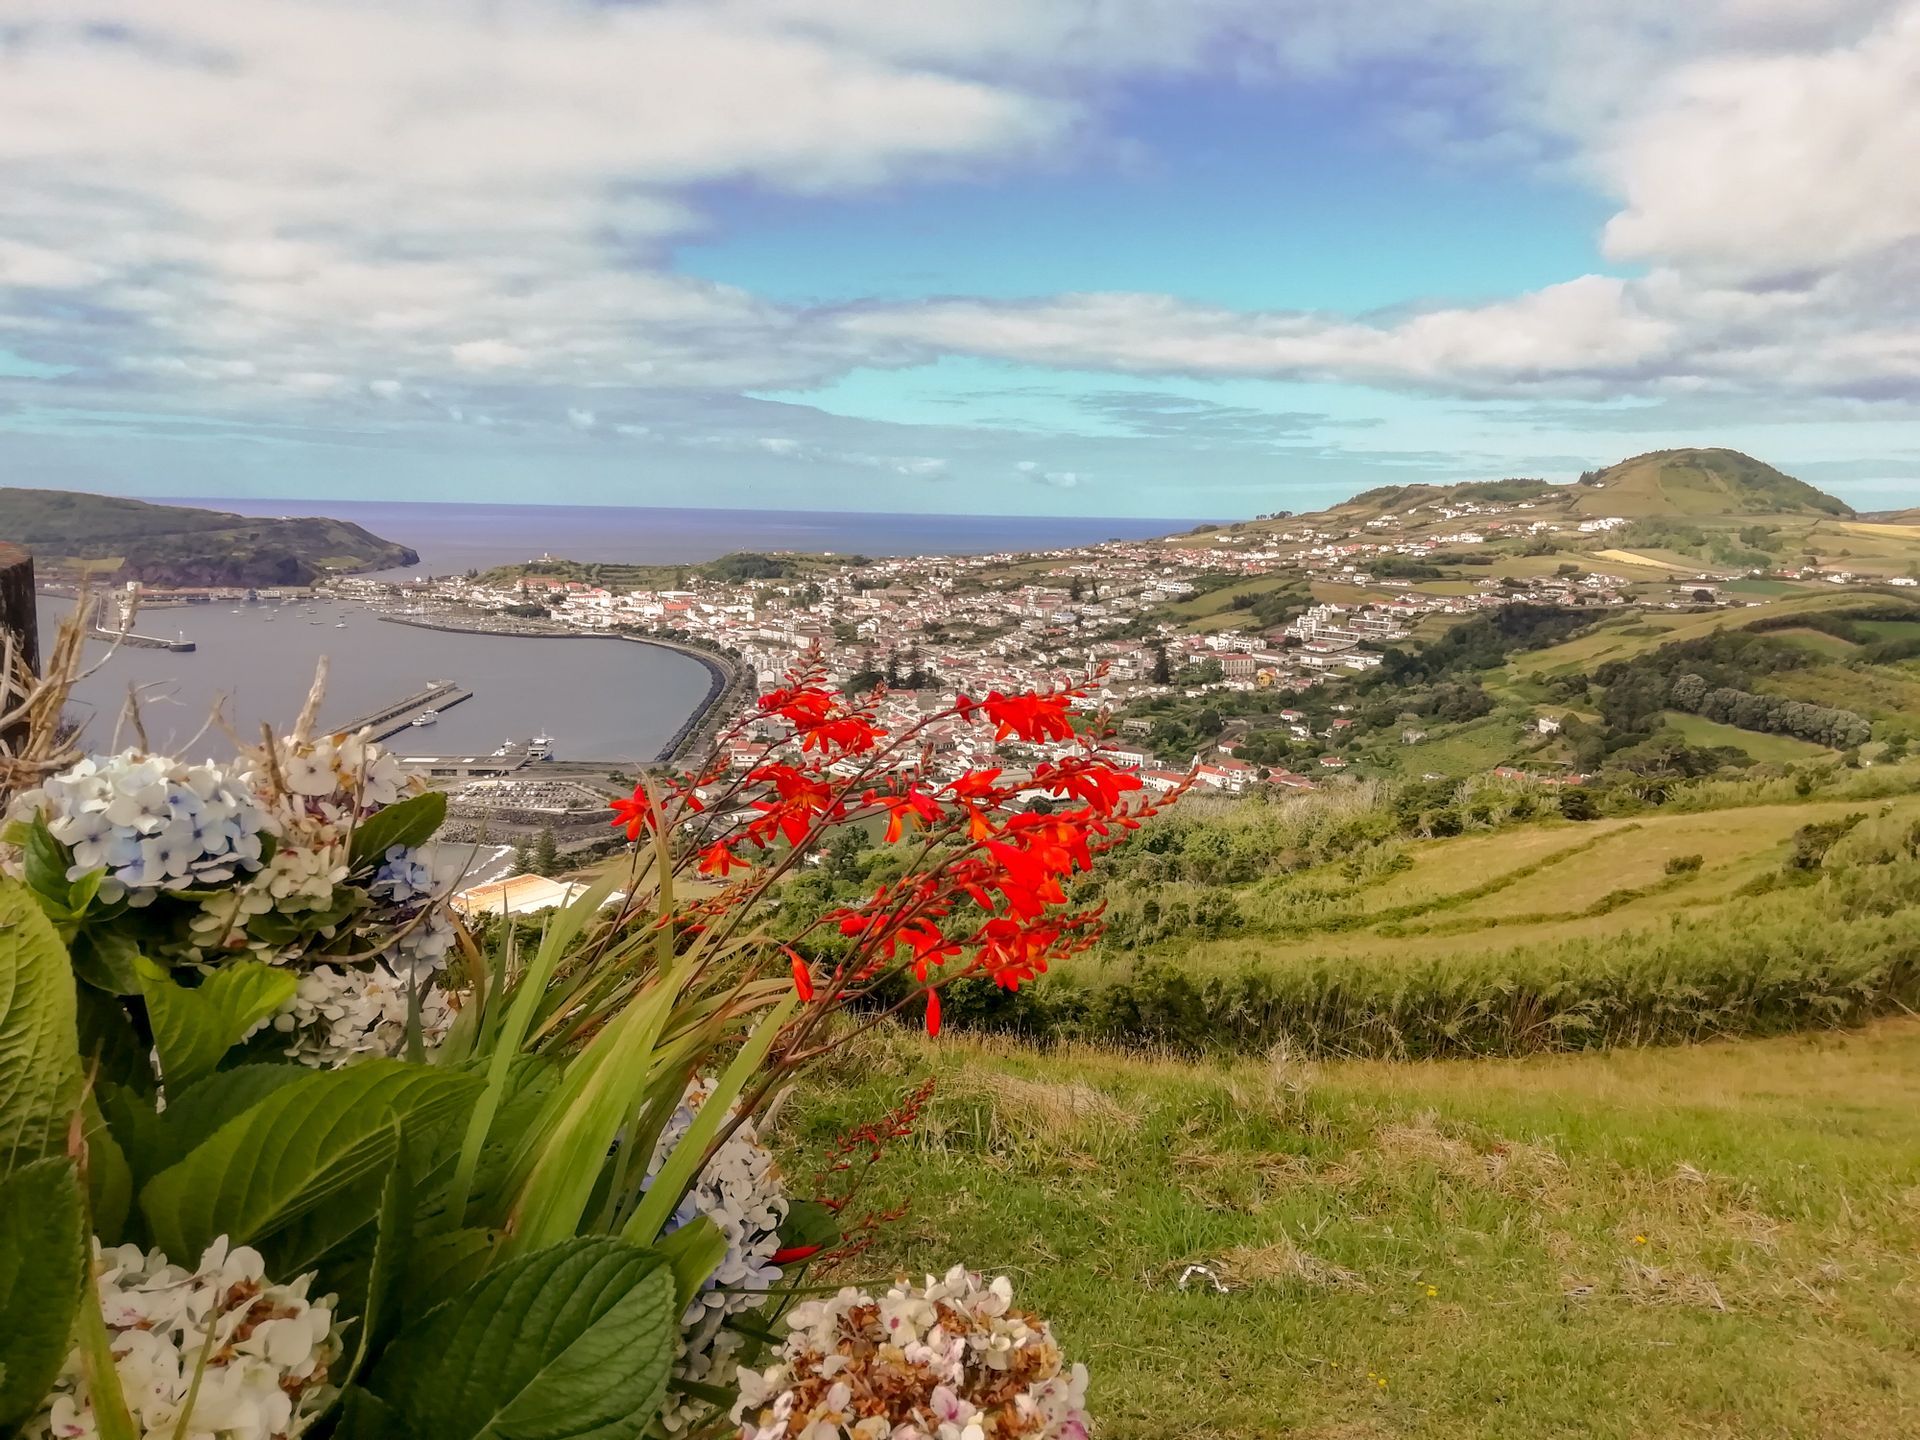 Visit the Nossa Senhora da Conceição Viewpoint on our half-day Excursions, Tours and Guided Visits on the island of Faial Azores.